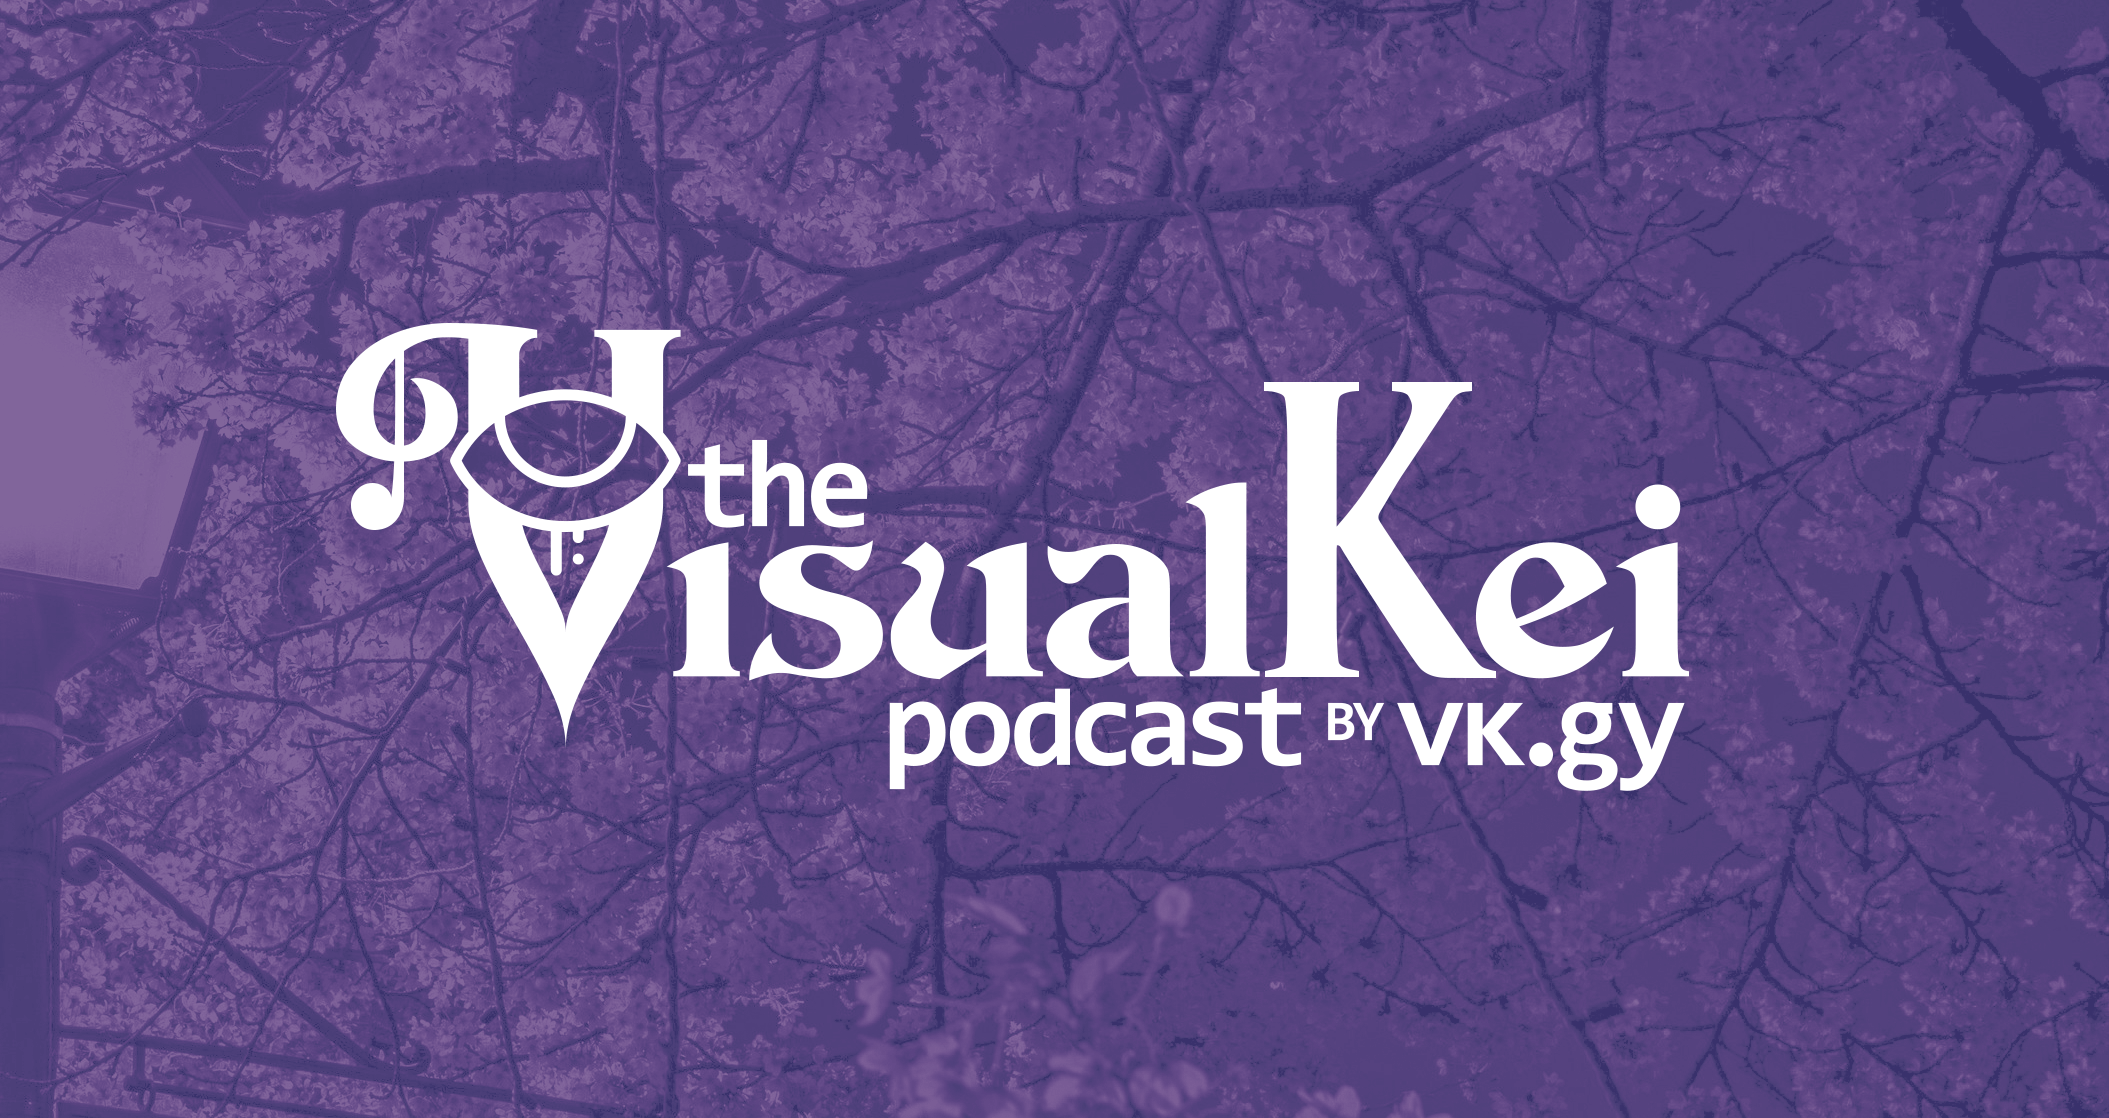 The Visual Kei Podcast joins vkgy